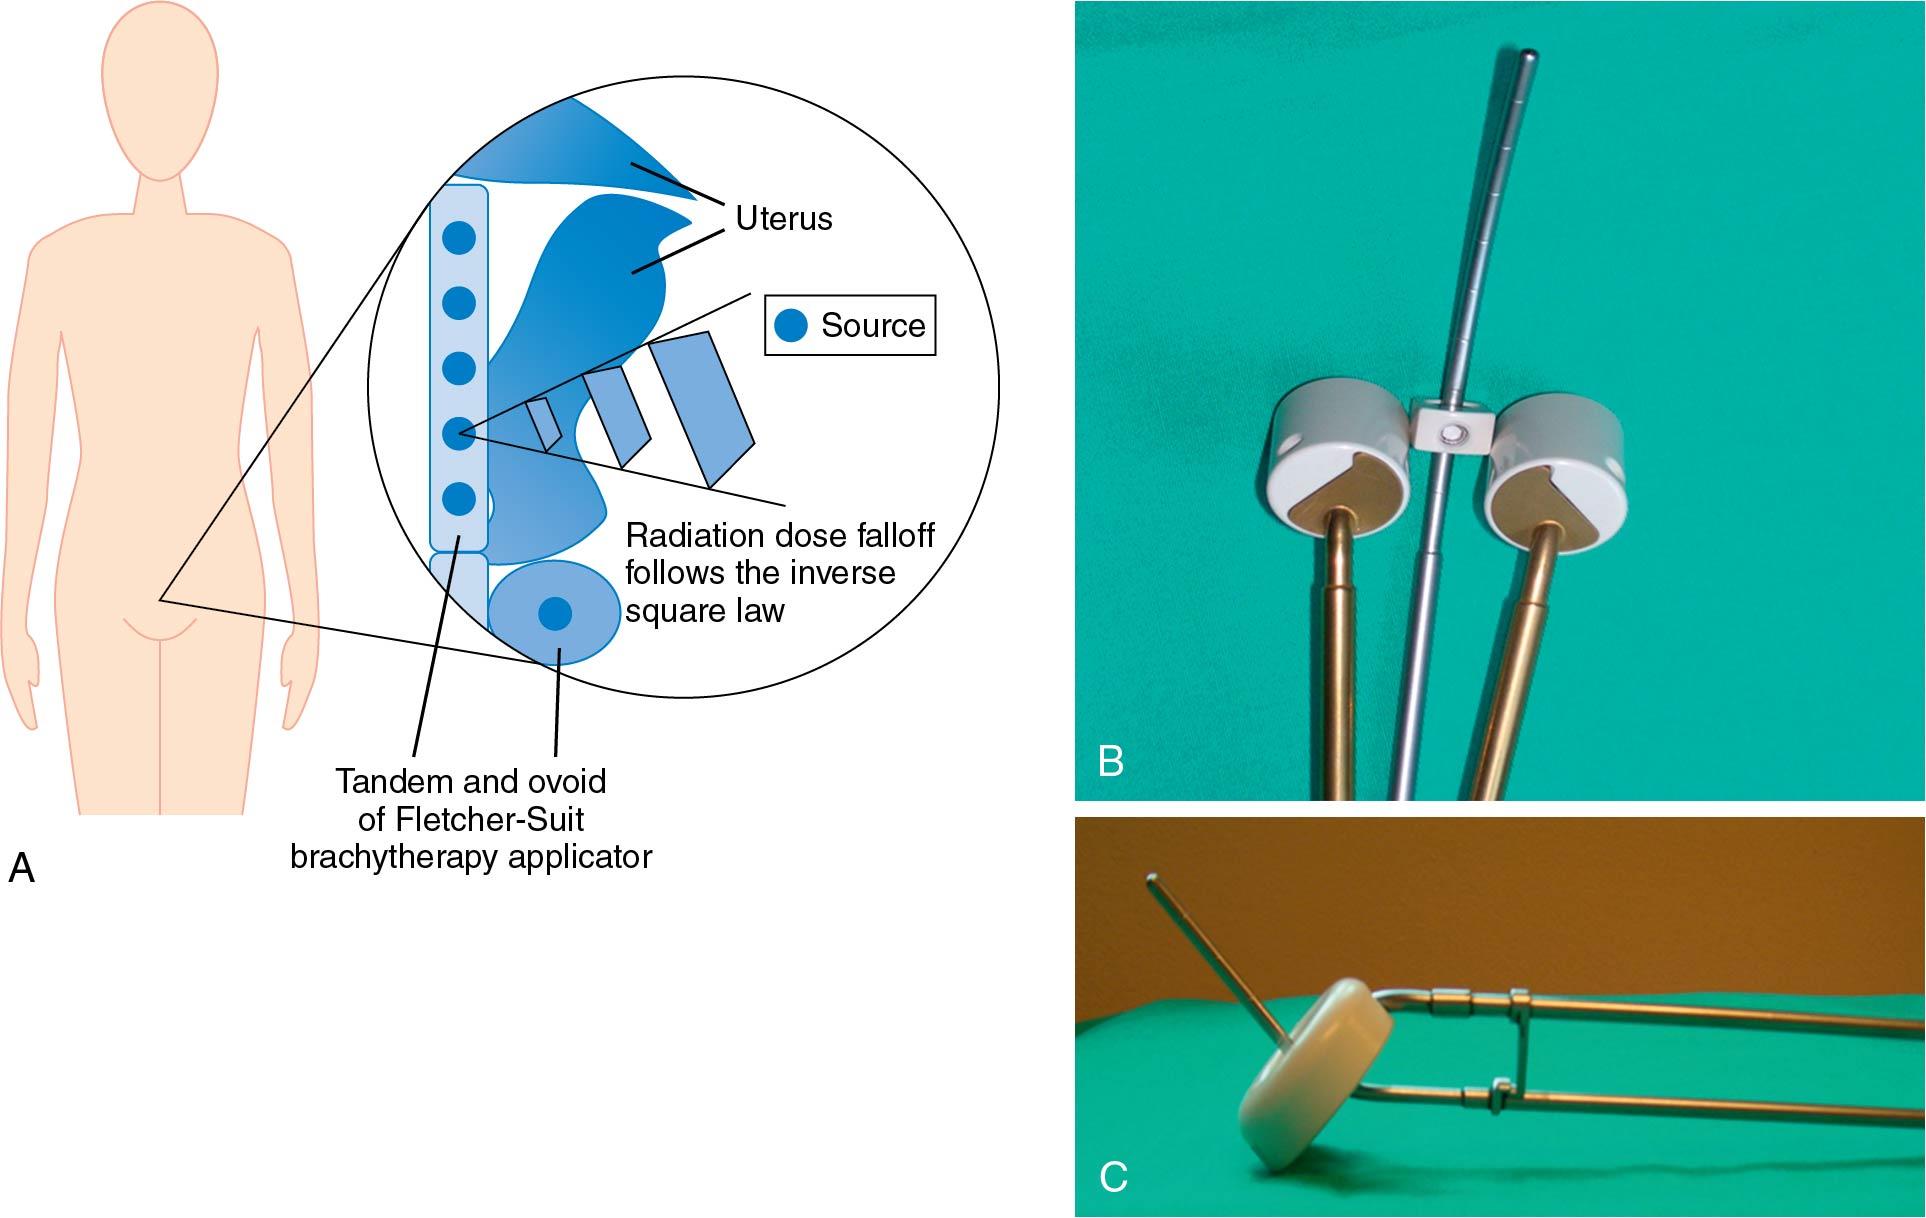 Fig. 28.6, Brachytherapy. For the treatment of gynecologic malignancies, brachytherapy usually consists of the placement of radiation sources (dark circles) in close proximity to the tumor (A). This can be accomplished by the intracavitary placement of hollow applicators such as the Fletcher-Suit applicator (inset) (B) or tandem and ring (C) placed within the uterine cavity and vaginal vault or by the interstitial placement of hollow needles through the tissues themselves. The radiation dose decreases as the square of the distance away from the radiation source.